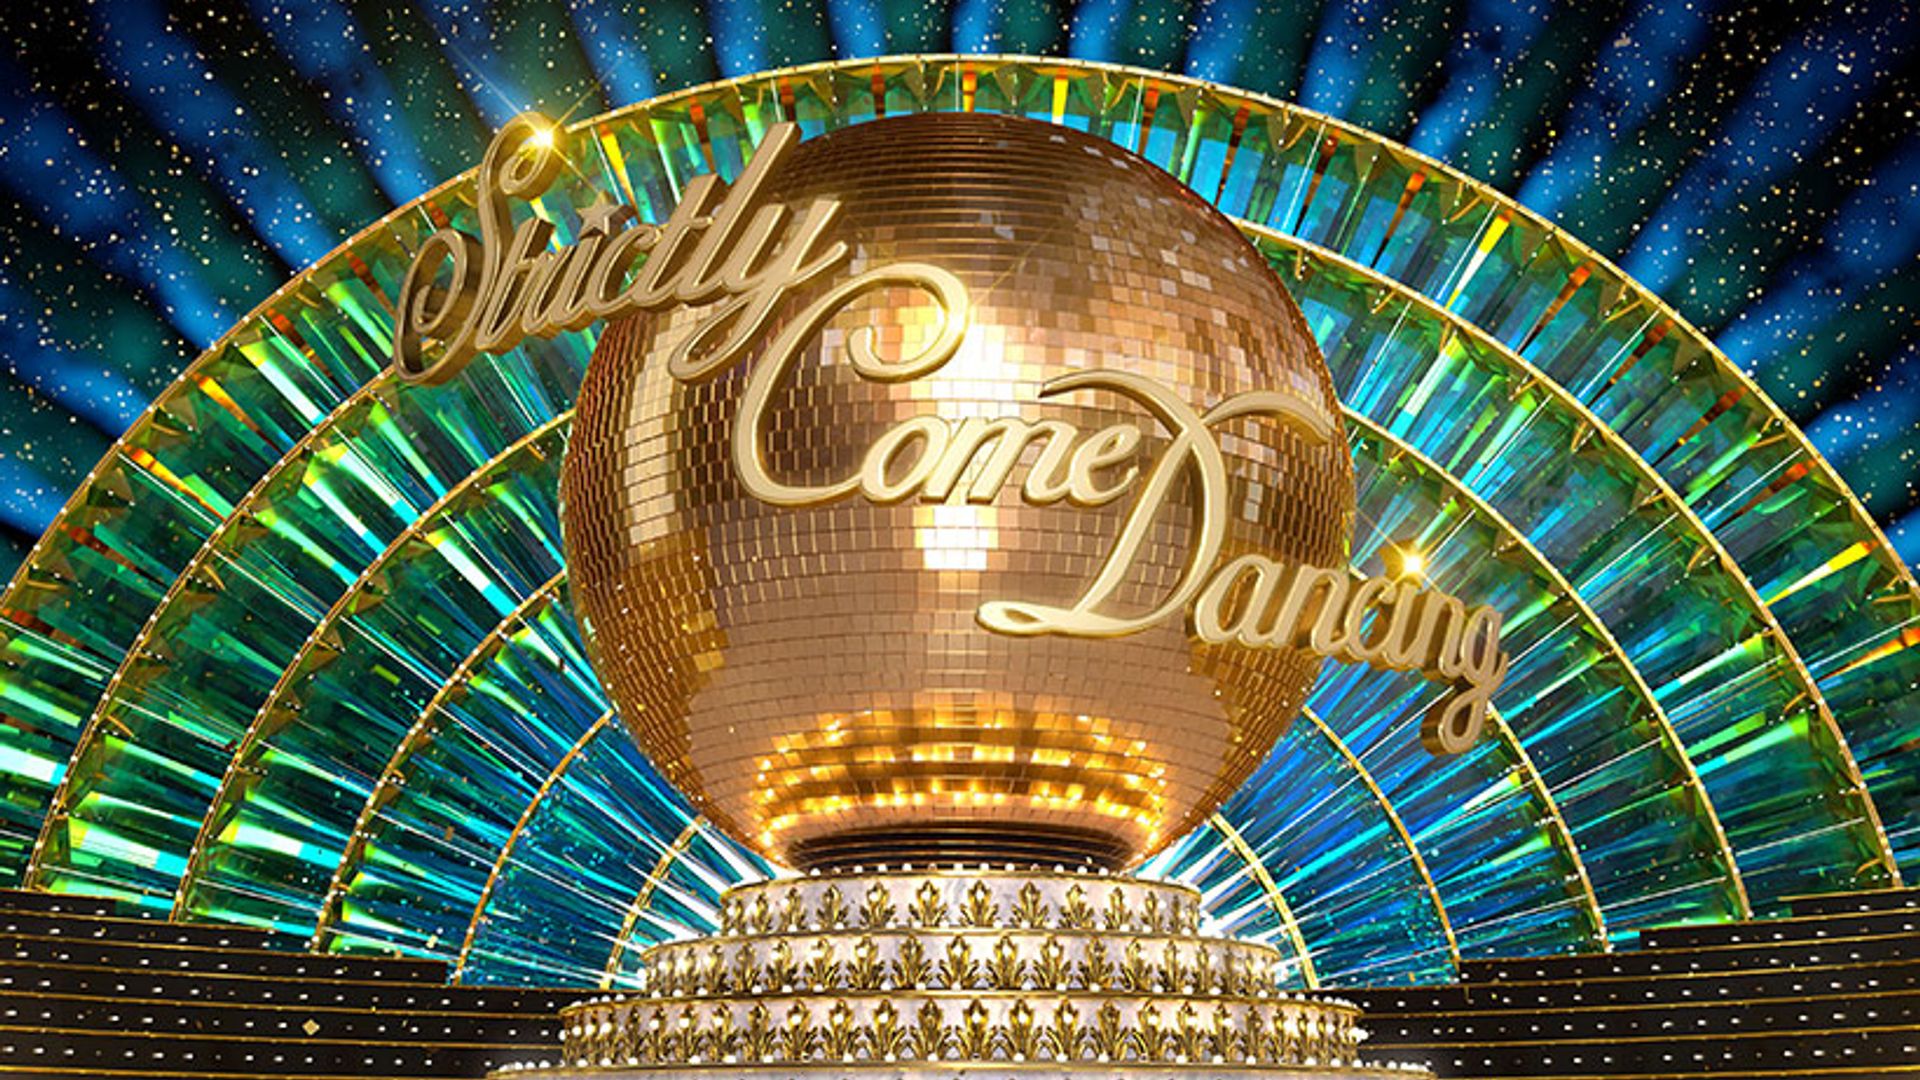 strictly come dancing credits